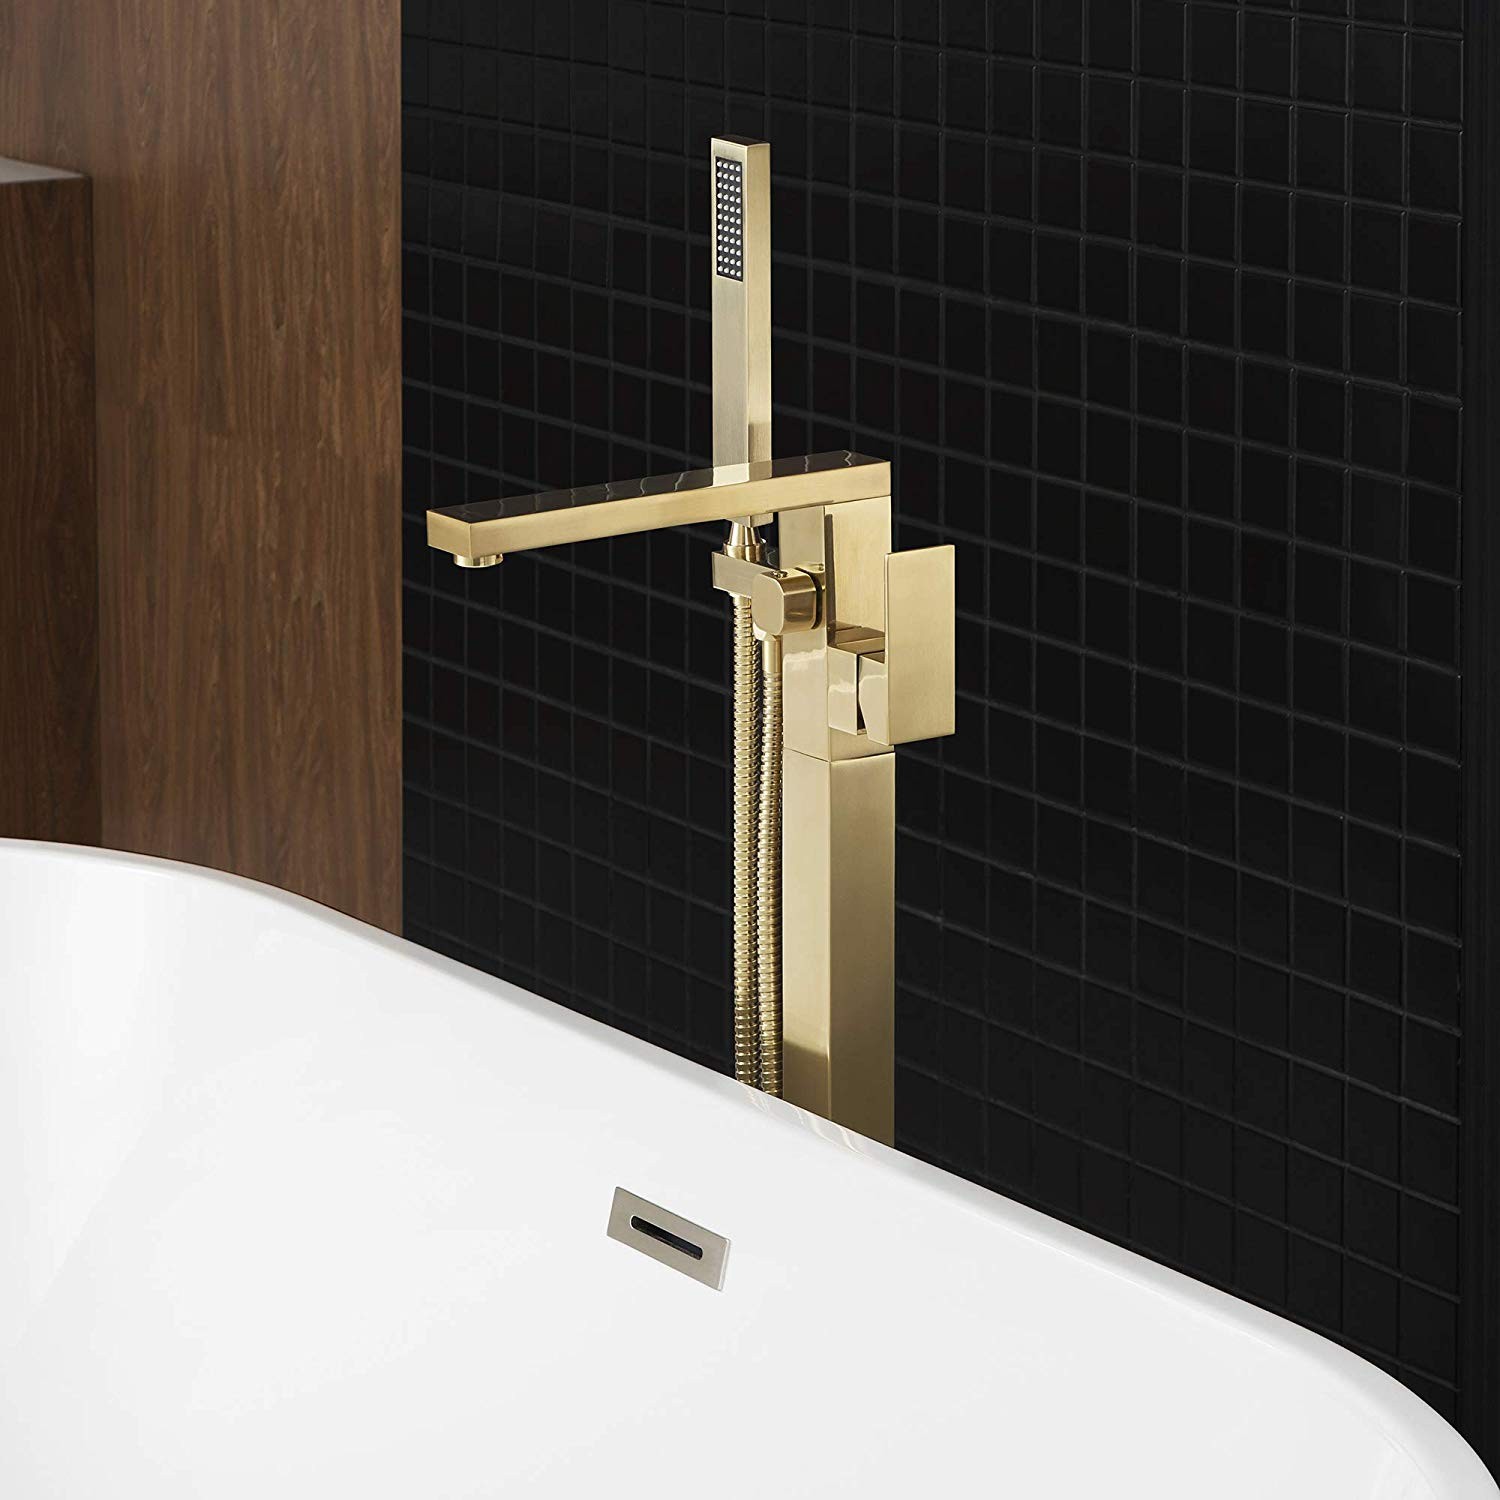  WOODBRIDGE F0008BG Contemporary Single Handle Floor Mount Freestanding Tub Filler Faucet with Hand shower in Brushed Gold Finish._10000